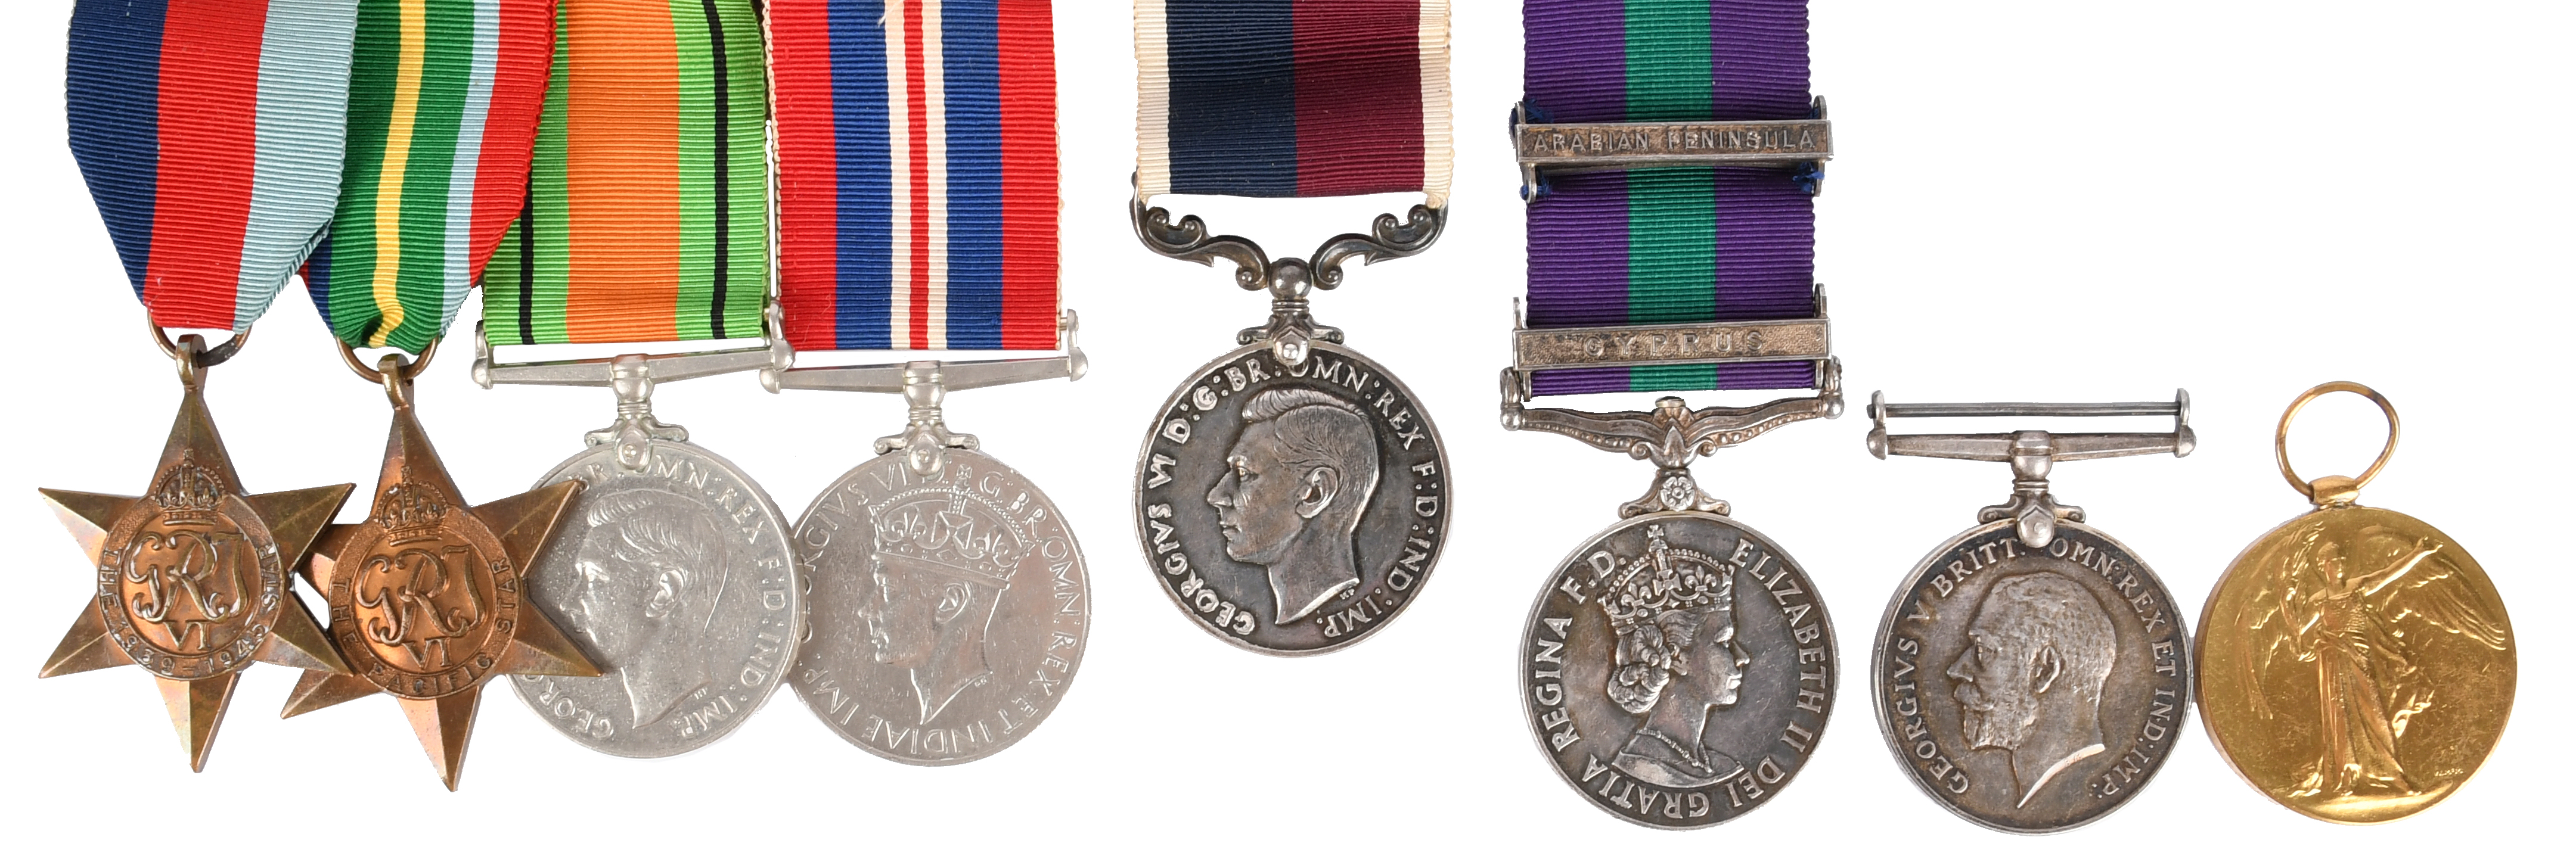 Seven medals named or attributed to Flight Sergeant A.J. Peduzie, Royal Air Force: 1939-45 Star,